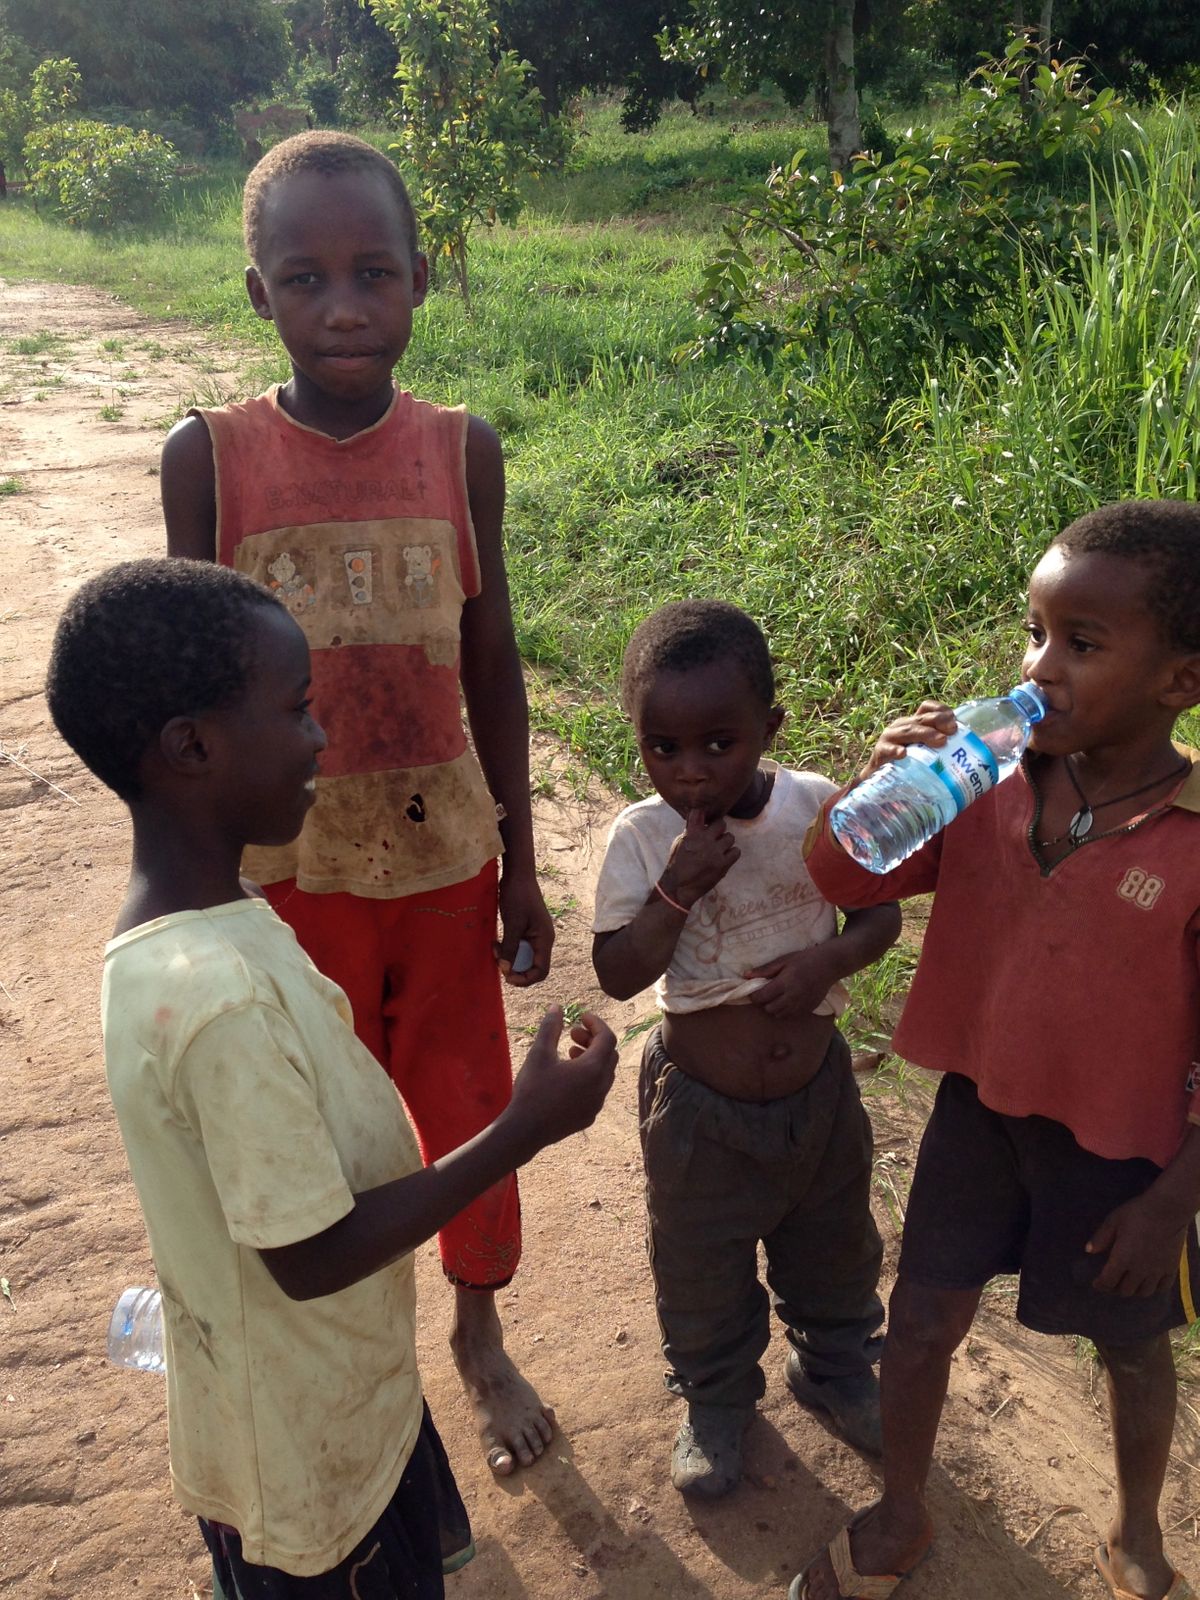 Sharing a clean bottle of water with our younger friends in Bweya, where a bore hole/ well is desperately needed